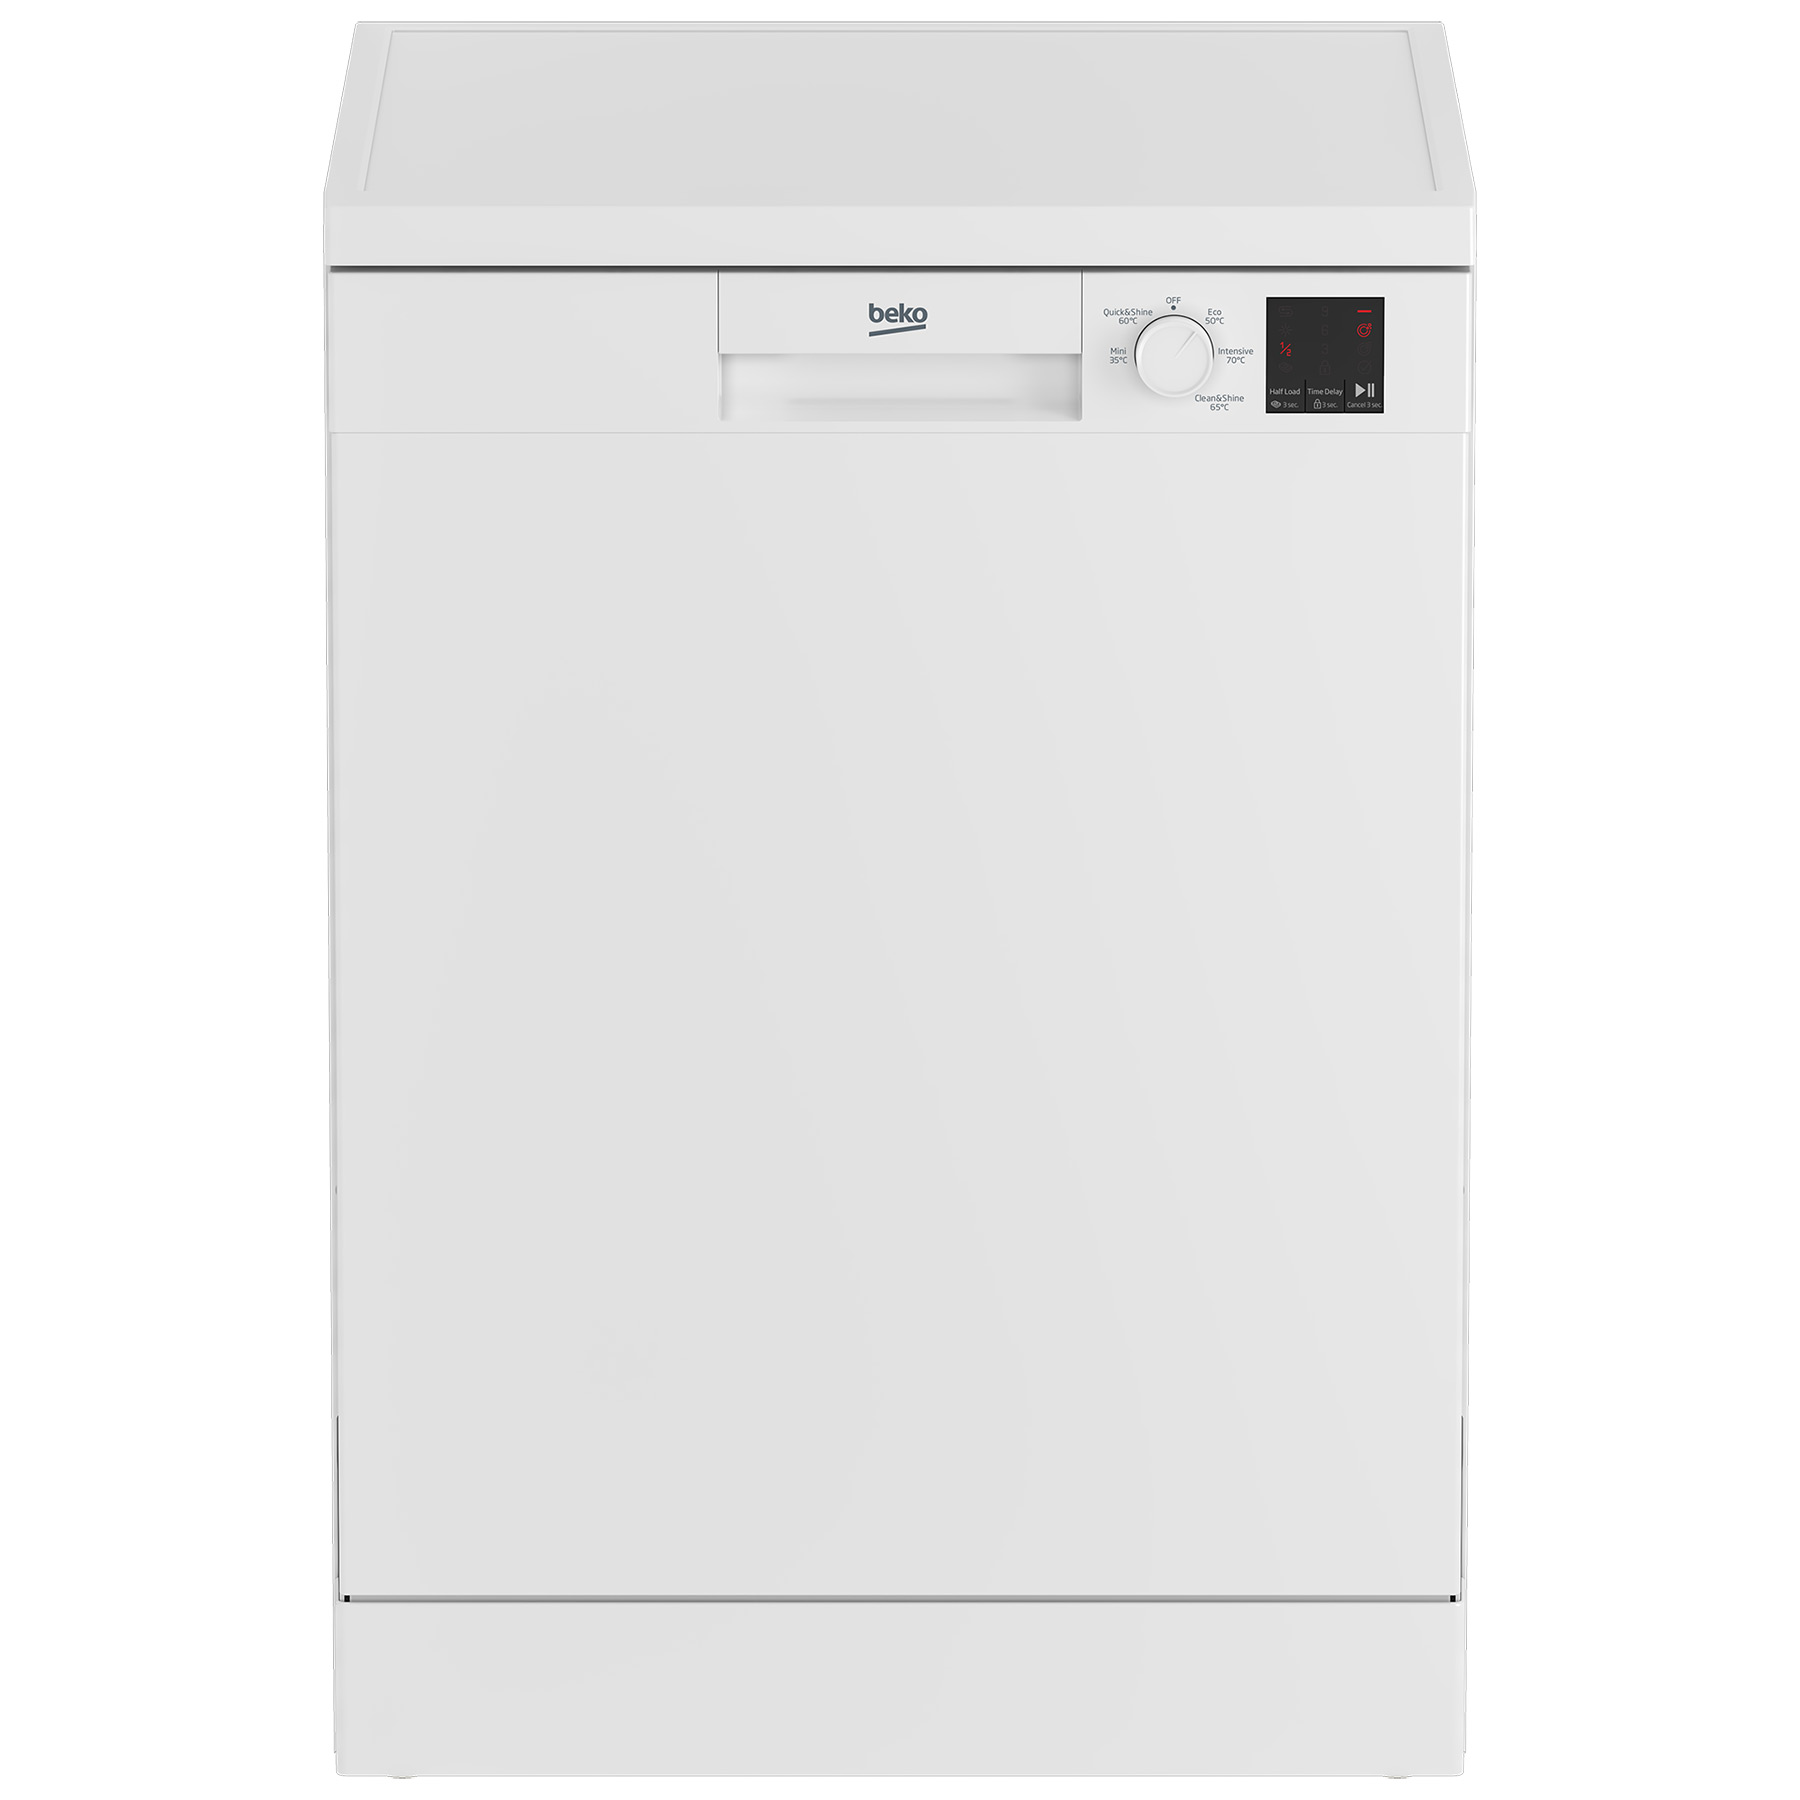 Image of Beko DVN05C20W 60cm Dishwasher in White 13 Place Setting E Rated